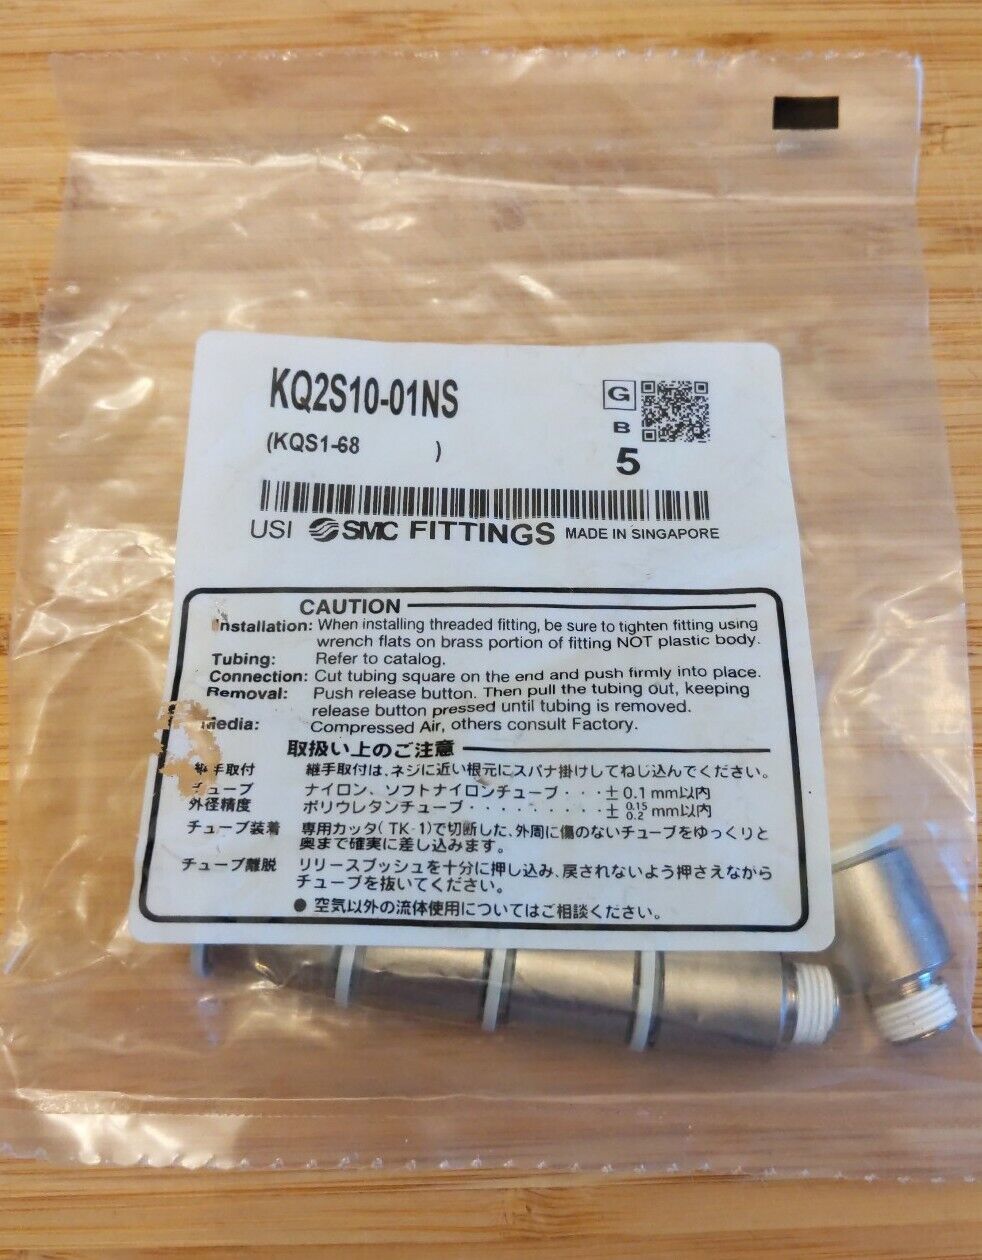 SMC KQ2S10-01NS Fitting Male 10mm Bag of 5 Pieces  (BL113)